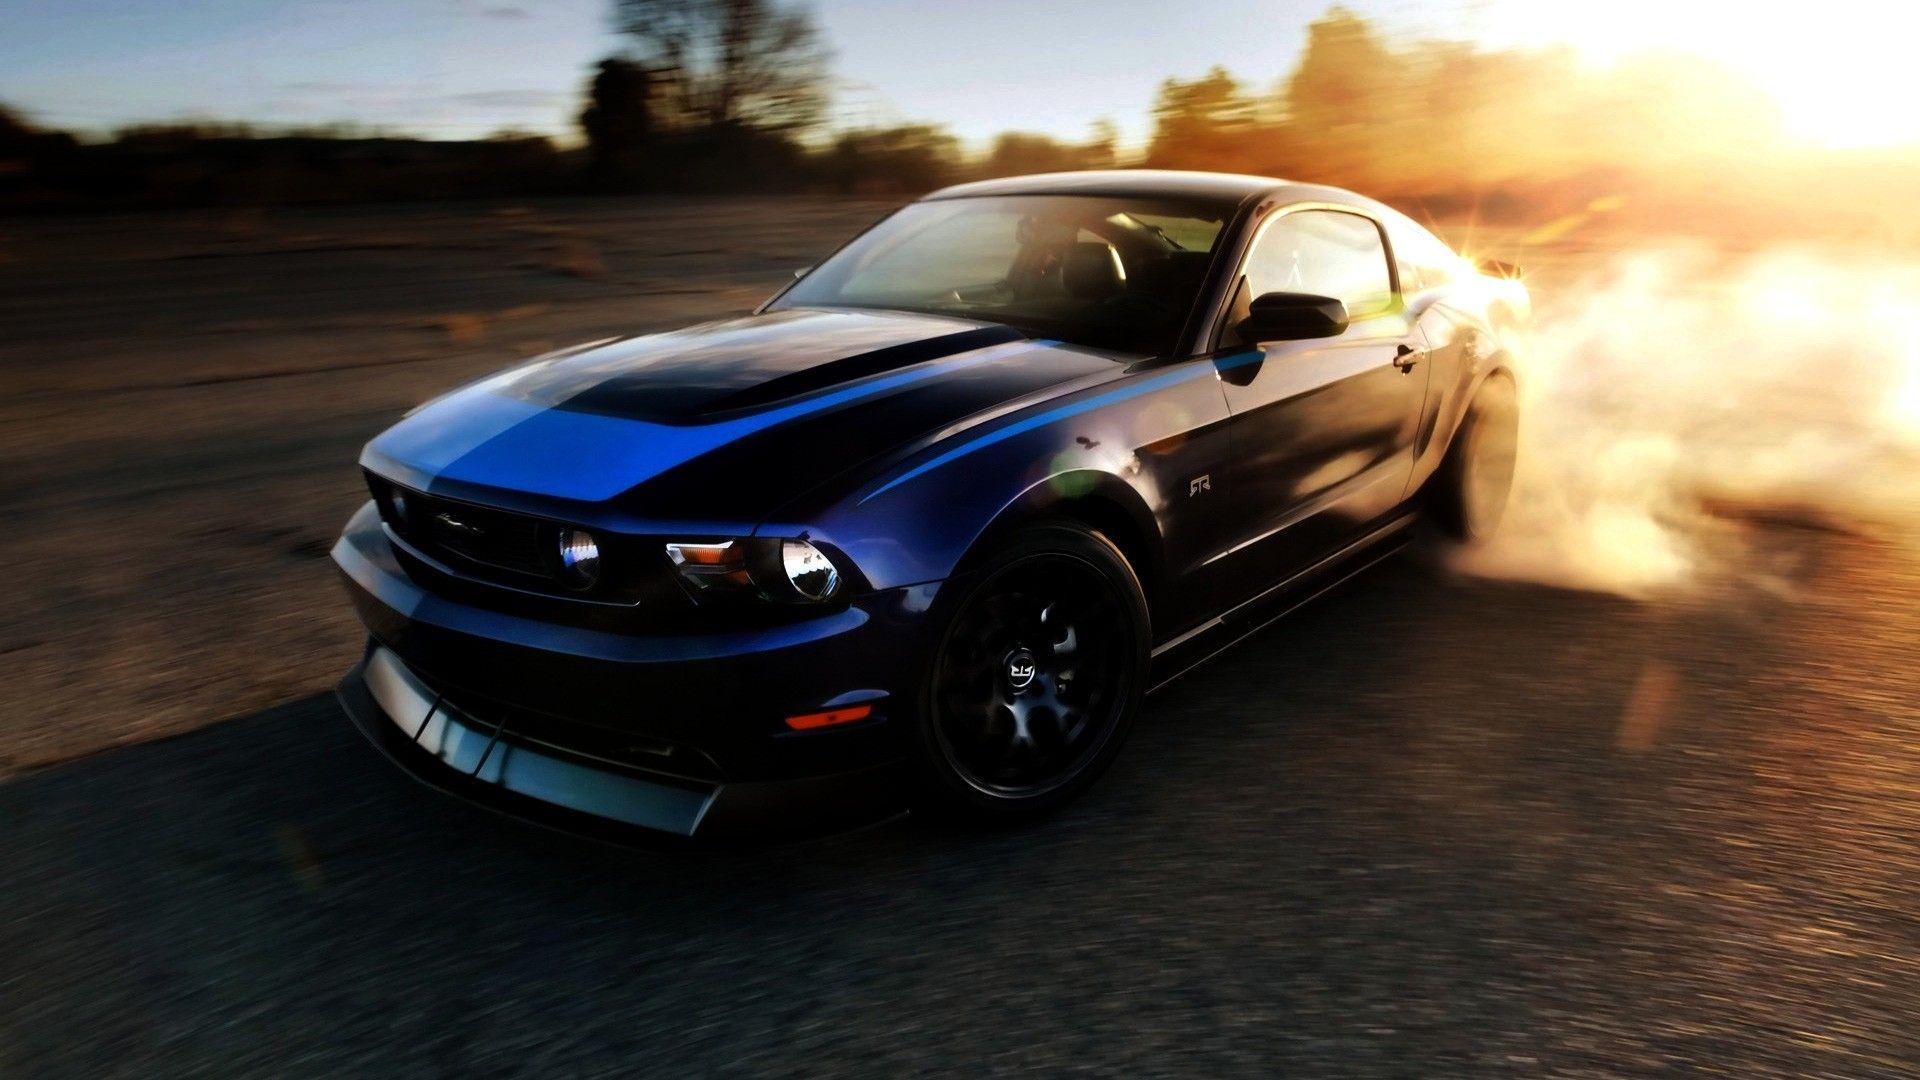 Blue Ford Mustang Shelby GT500 Muscle Car Wallpaper